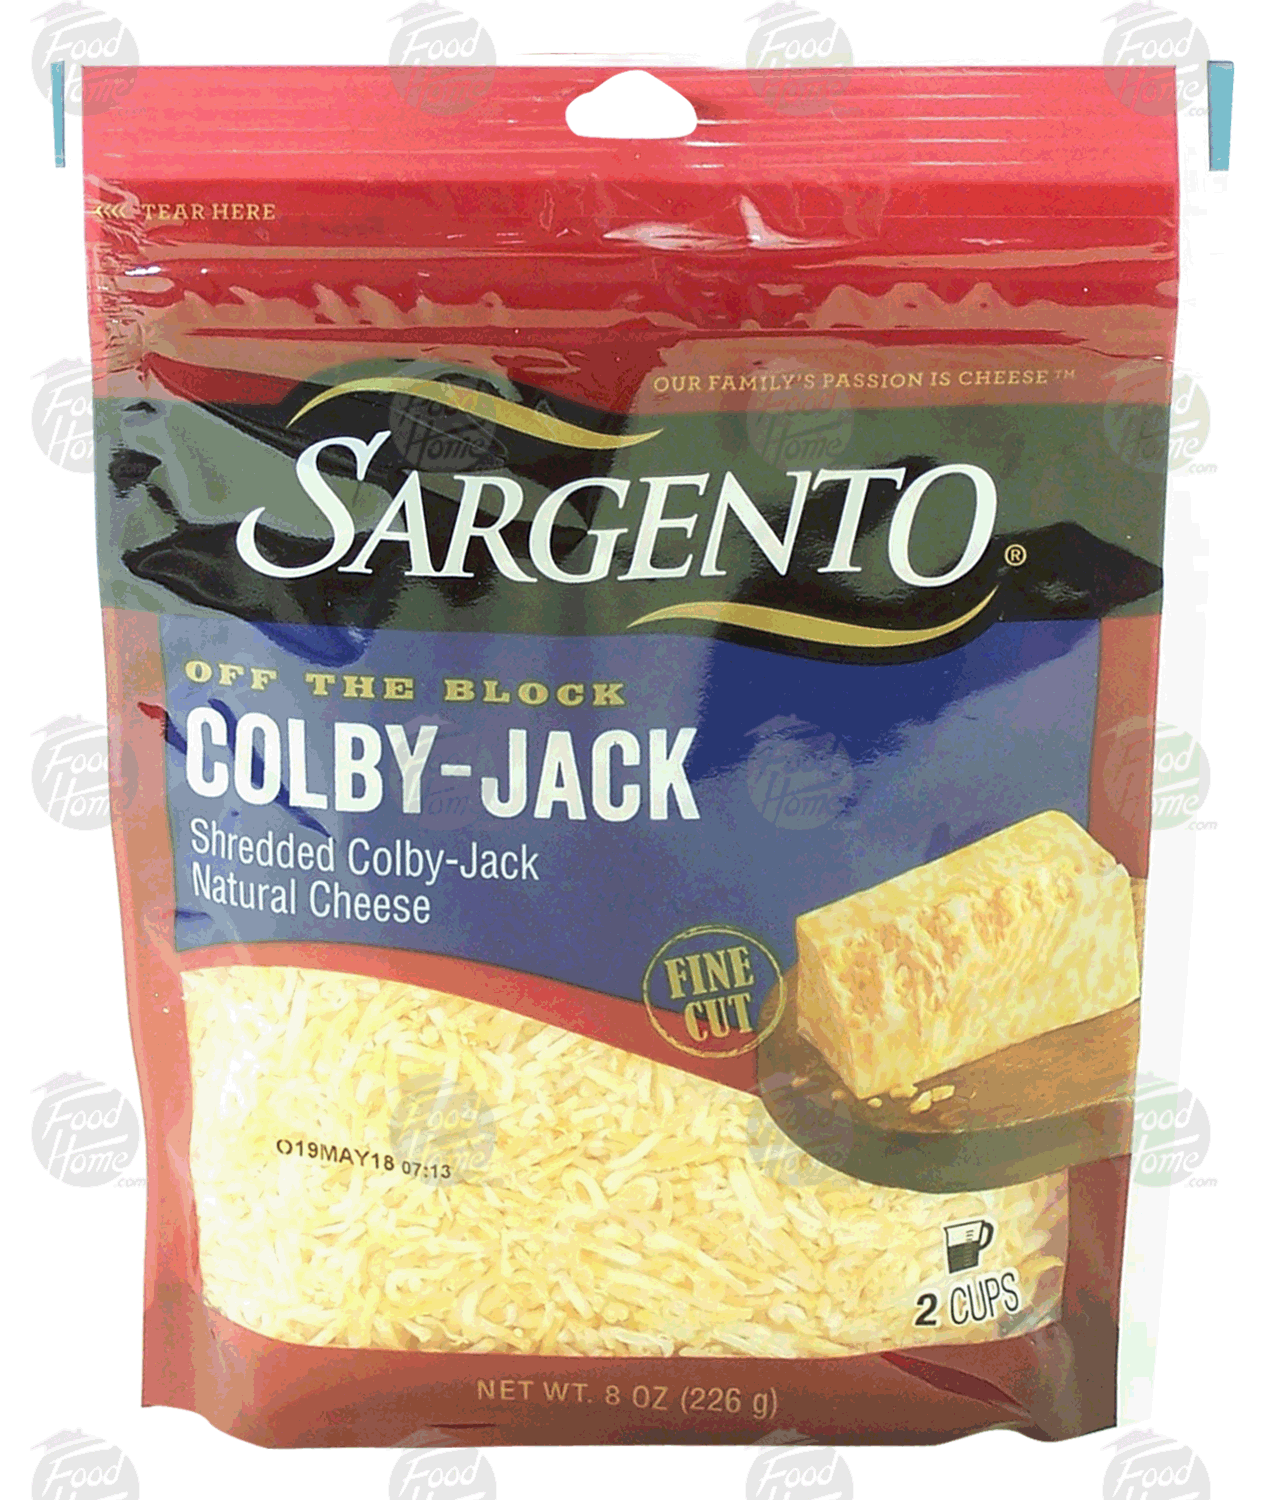 Sargento(R) Off the Block colby-jack shredded natural cheese Full-Size Picture